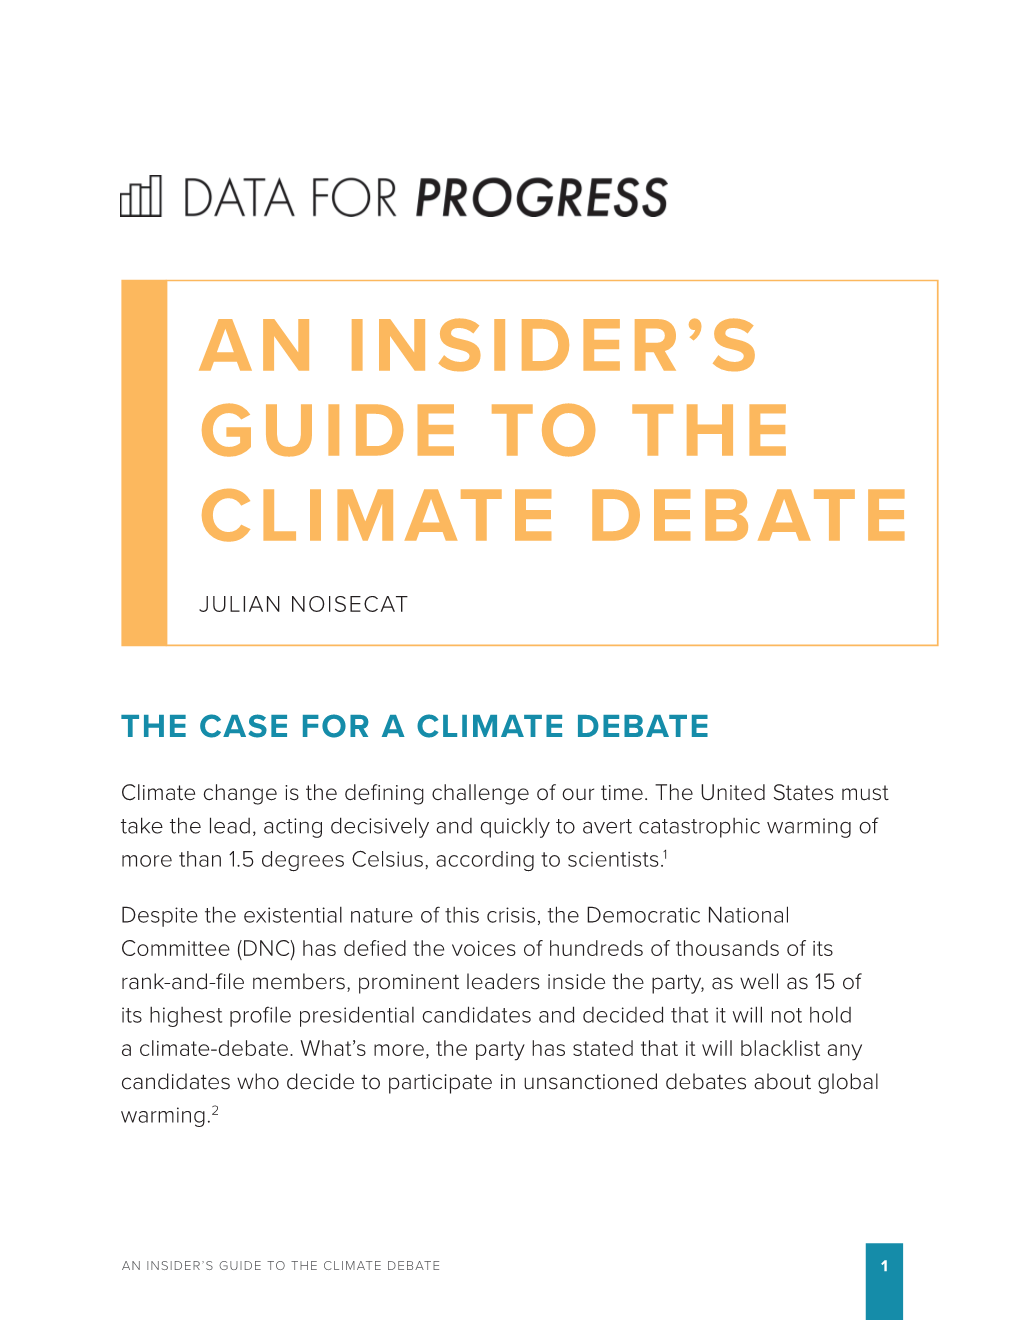 An Insider's Guide to the Climate Debate